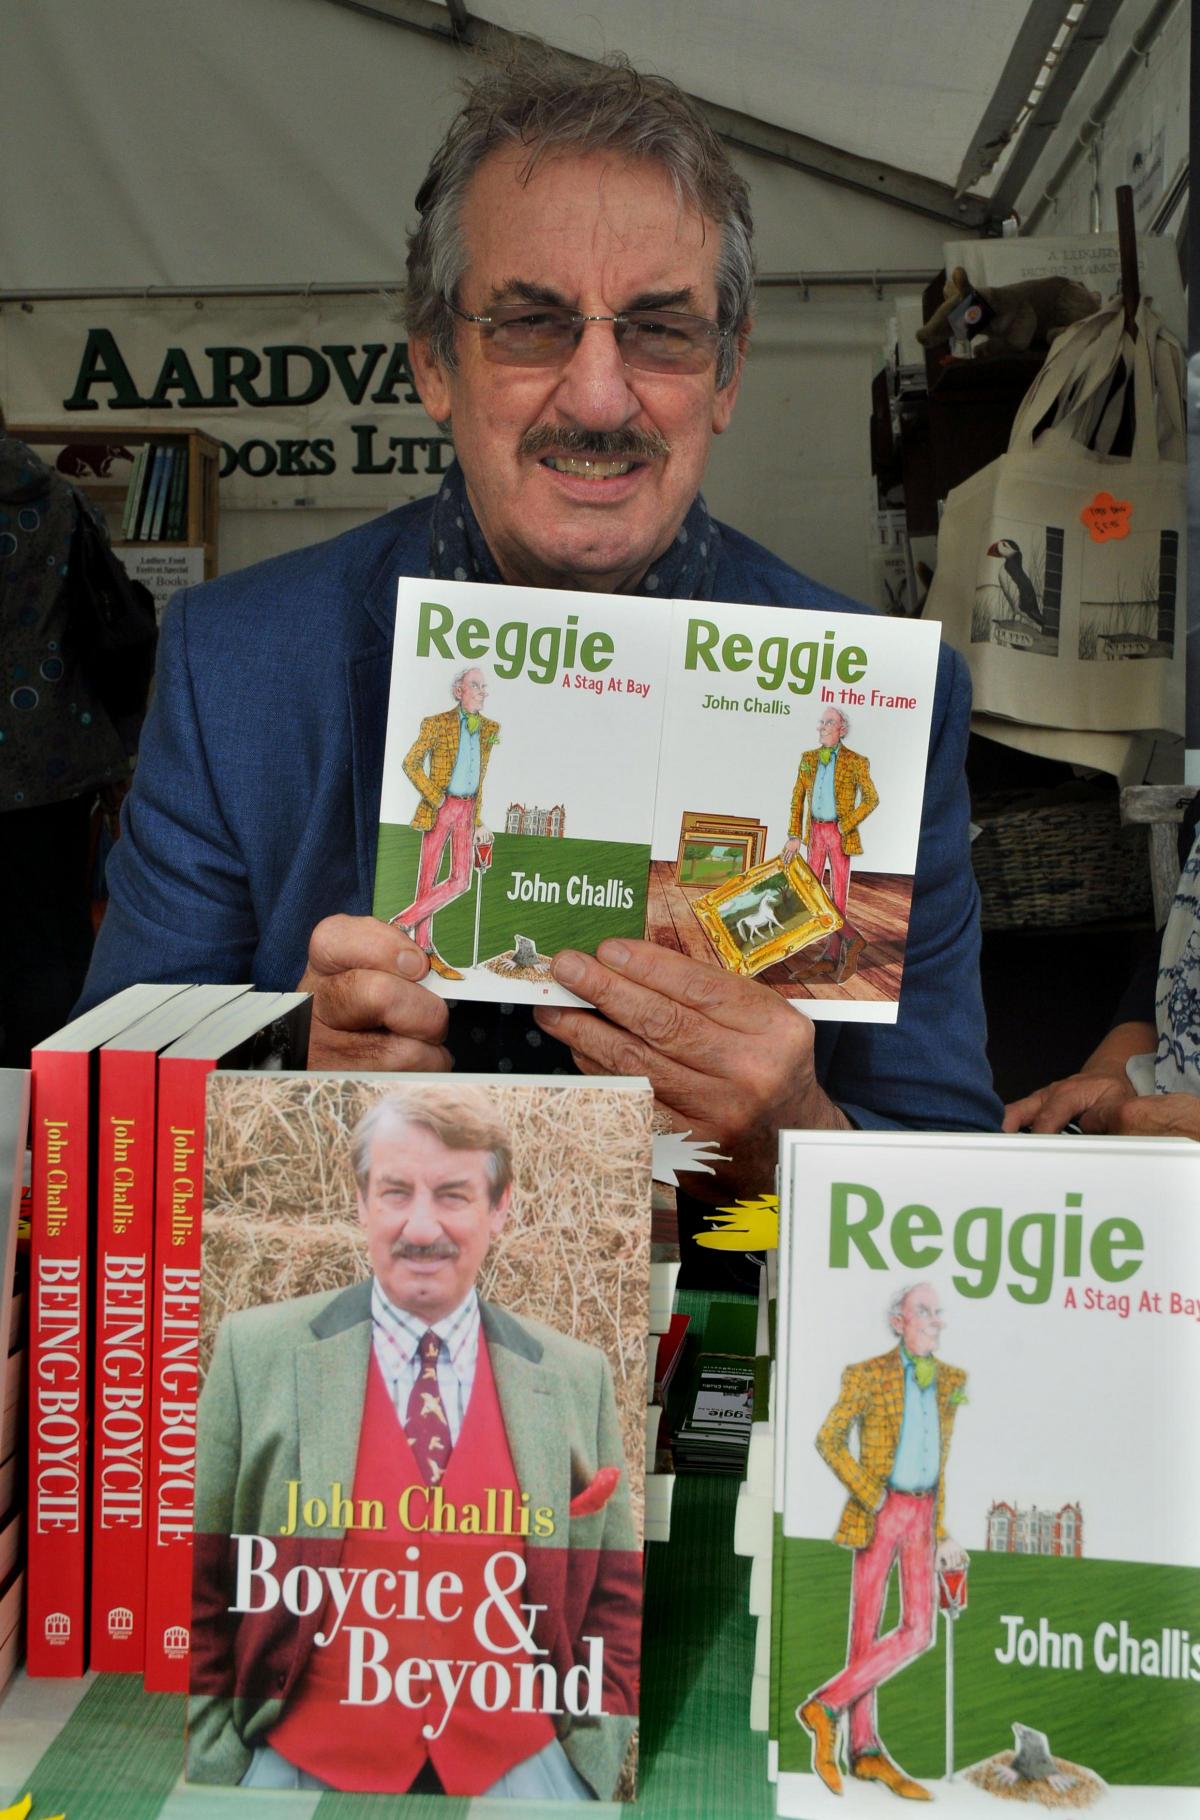 Actor John Challis was on hand to promote and sign his books 